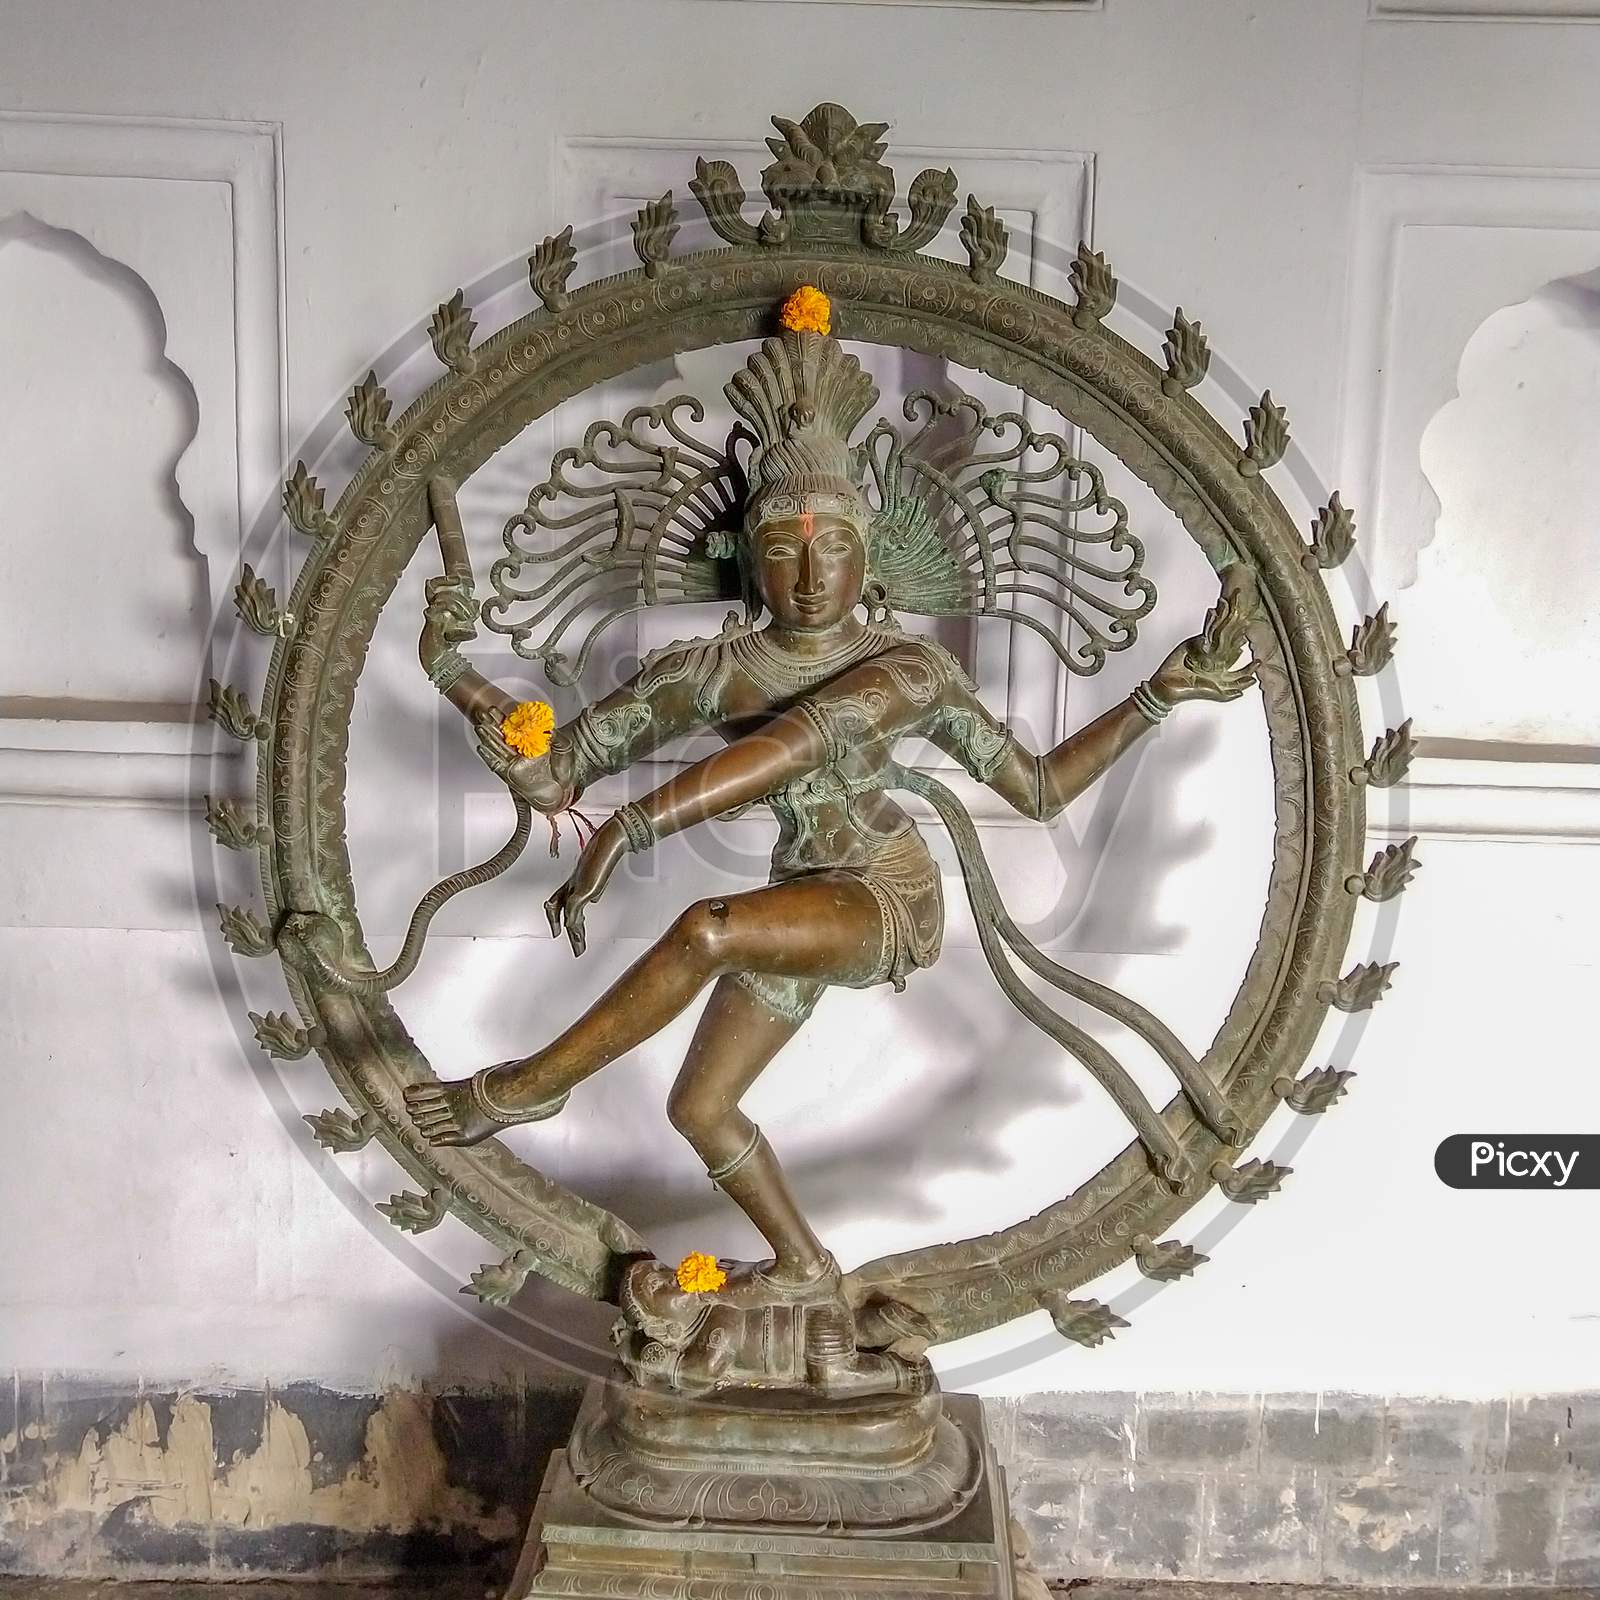 Ancient Metal Statue Of The Lord Of Dance Nataraja. Nataraja Is A Depiction Of The Hindu God Shiva As The Divine Dancer.